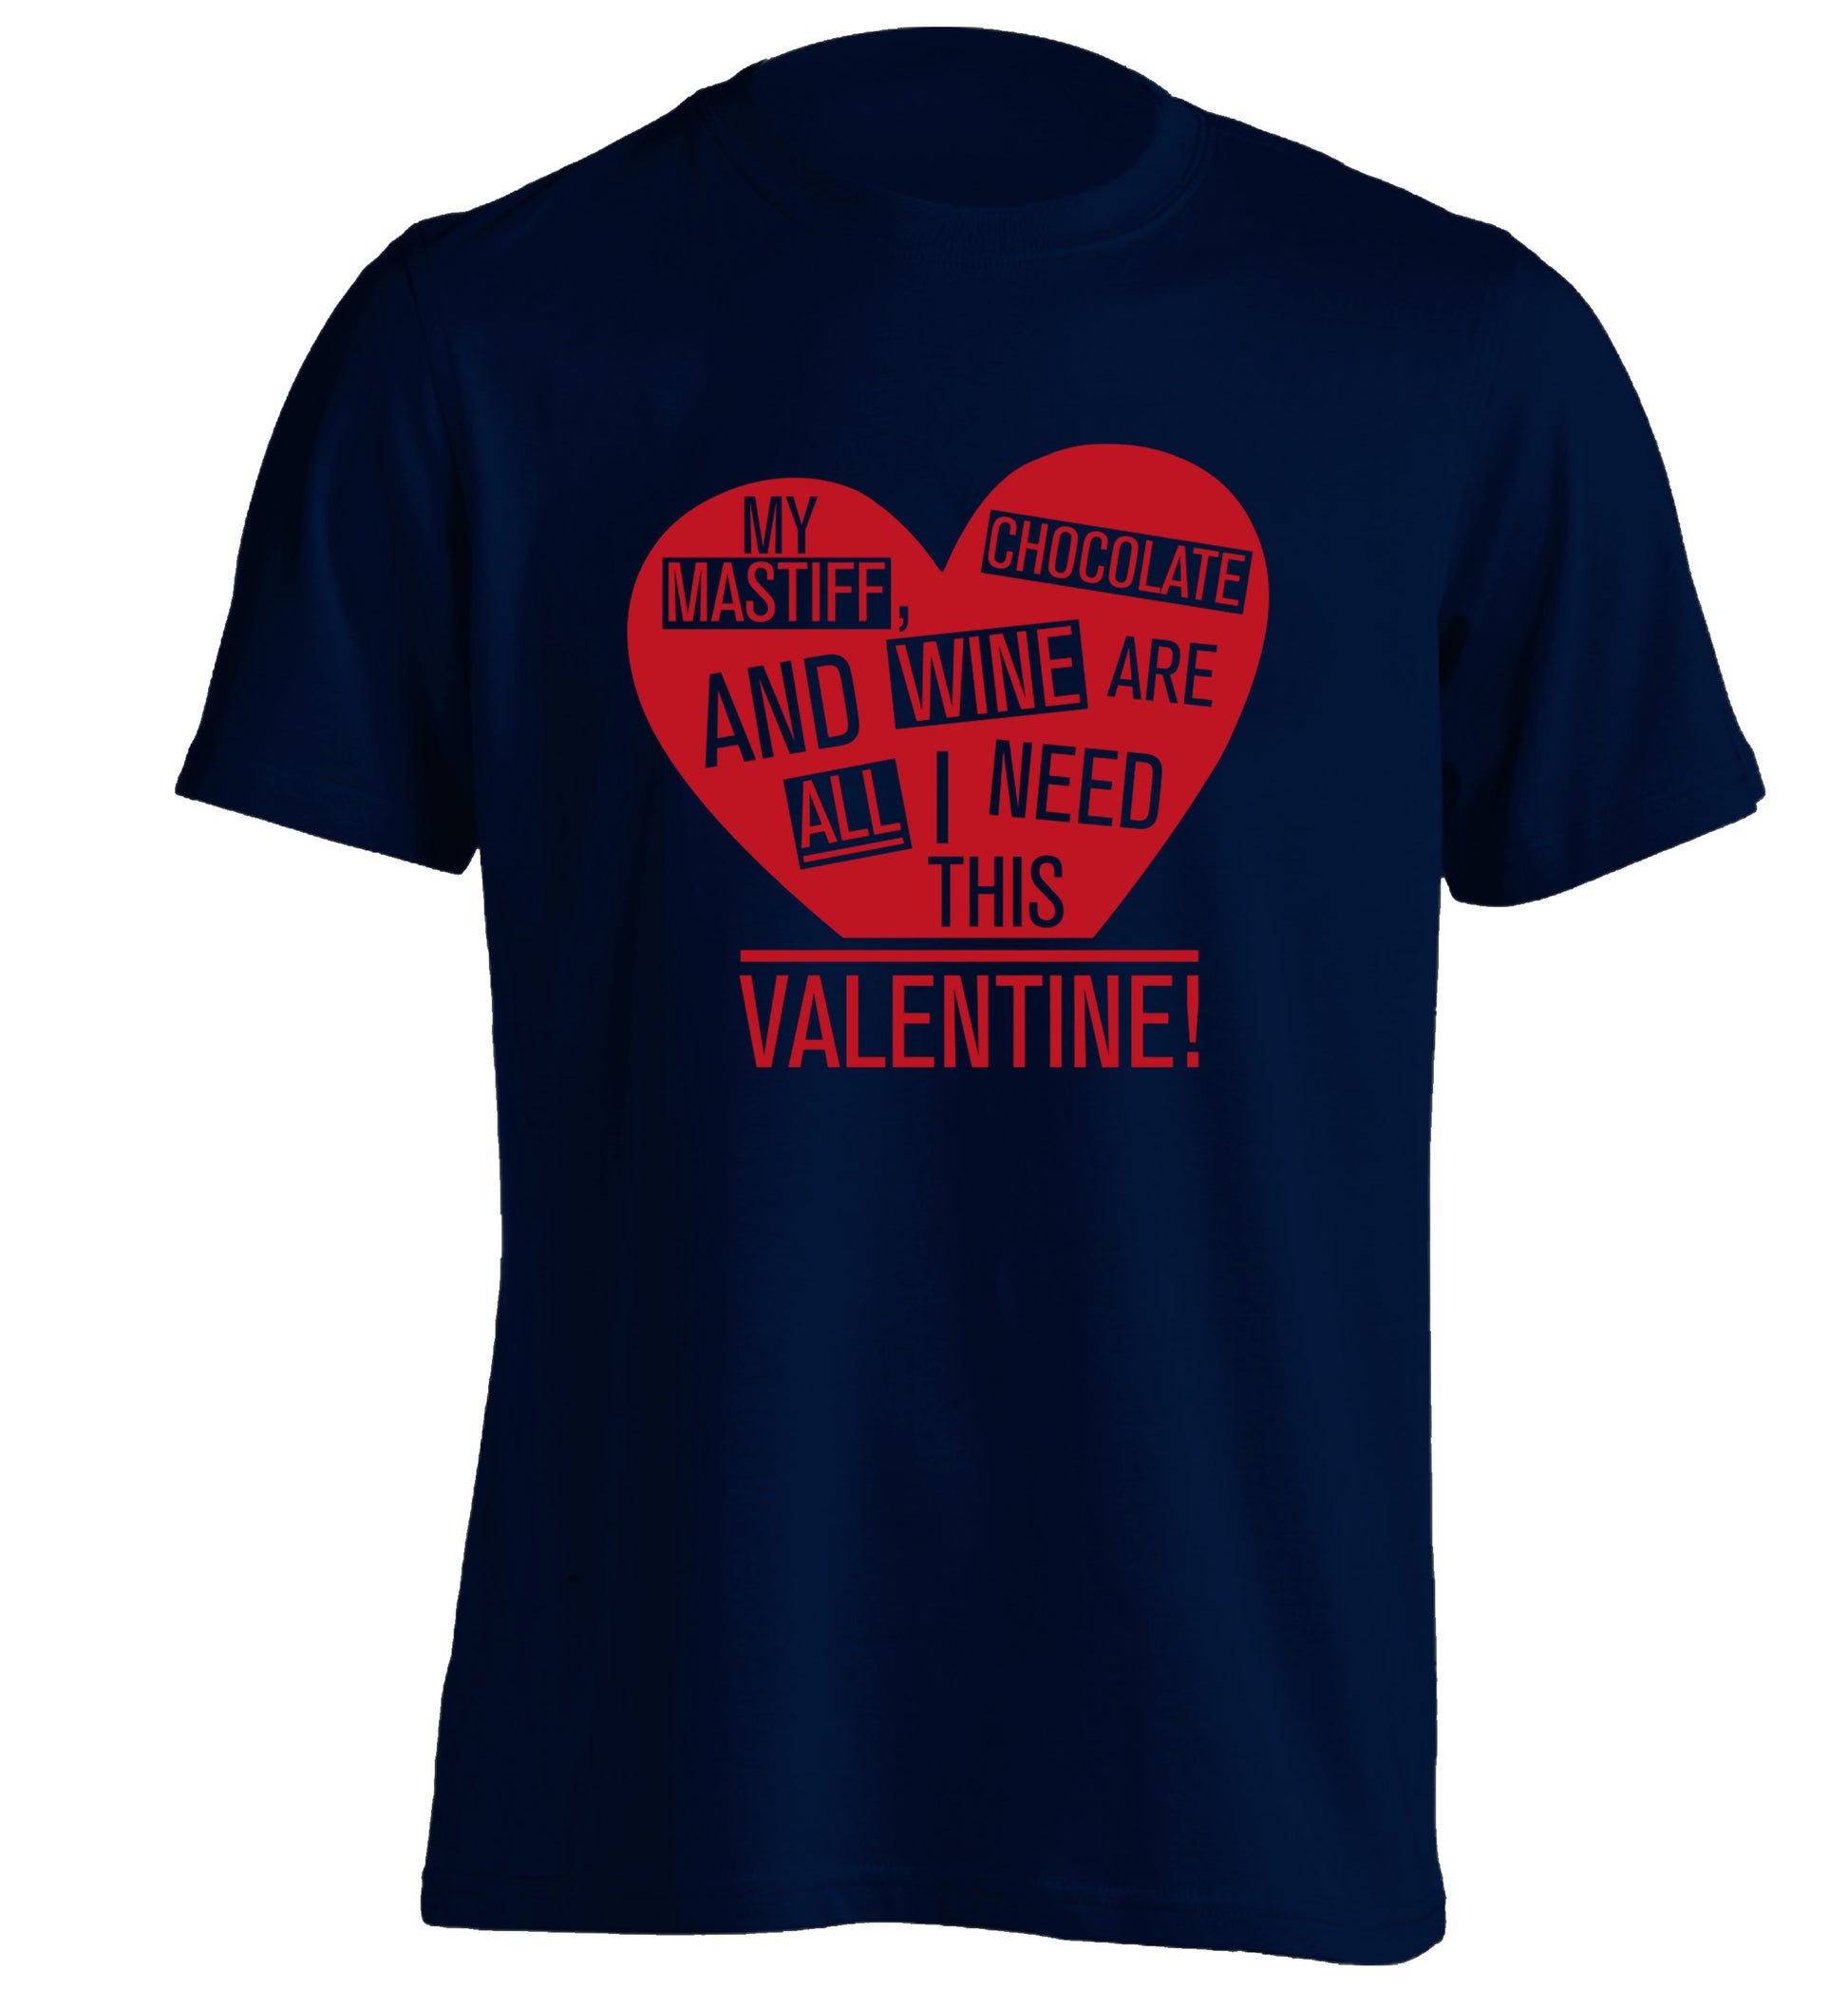 My mastiff, chocolate and wine are all I need this valentine! adults unisex navy Tshirt 2XL